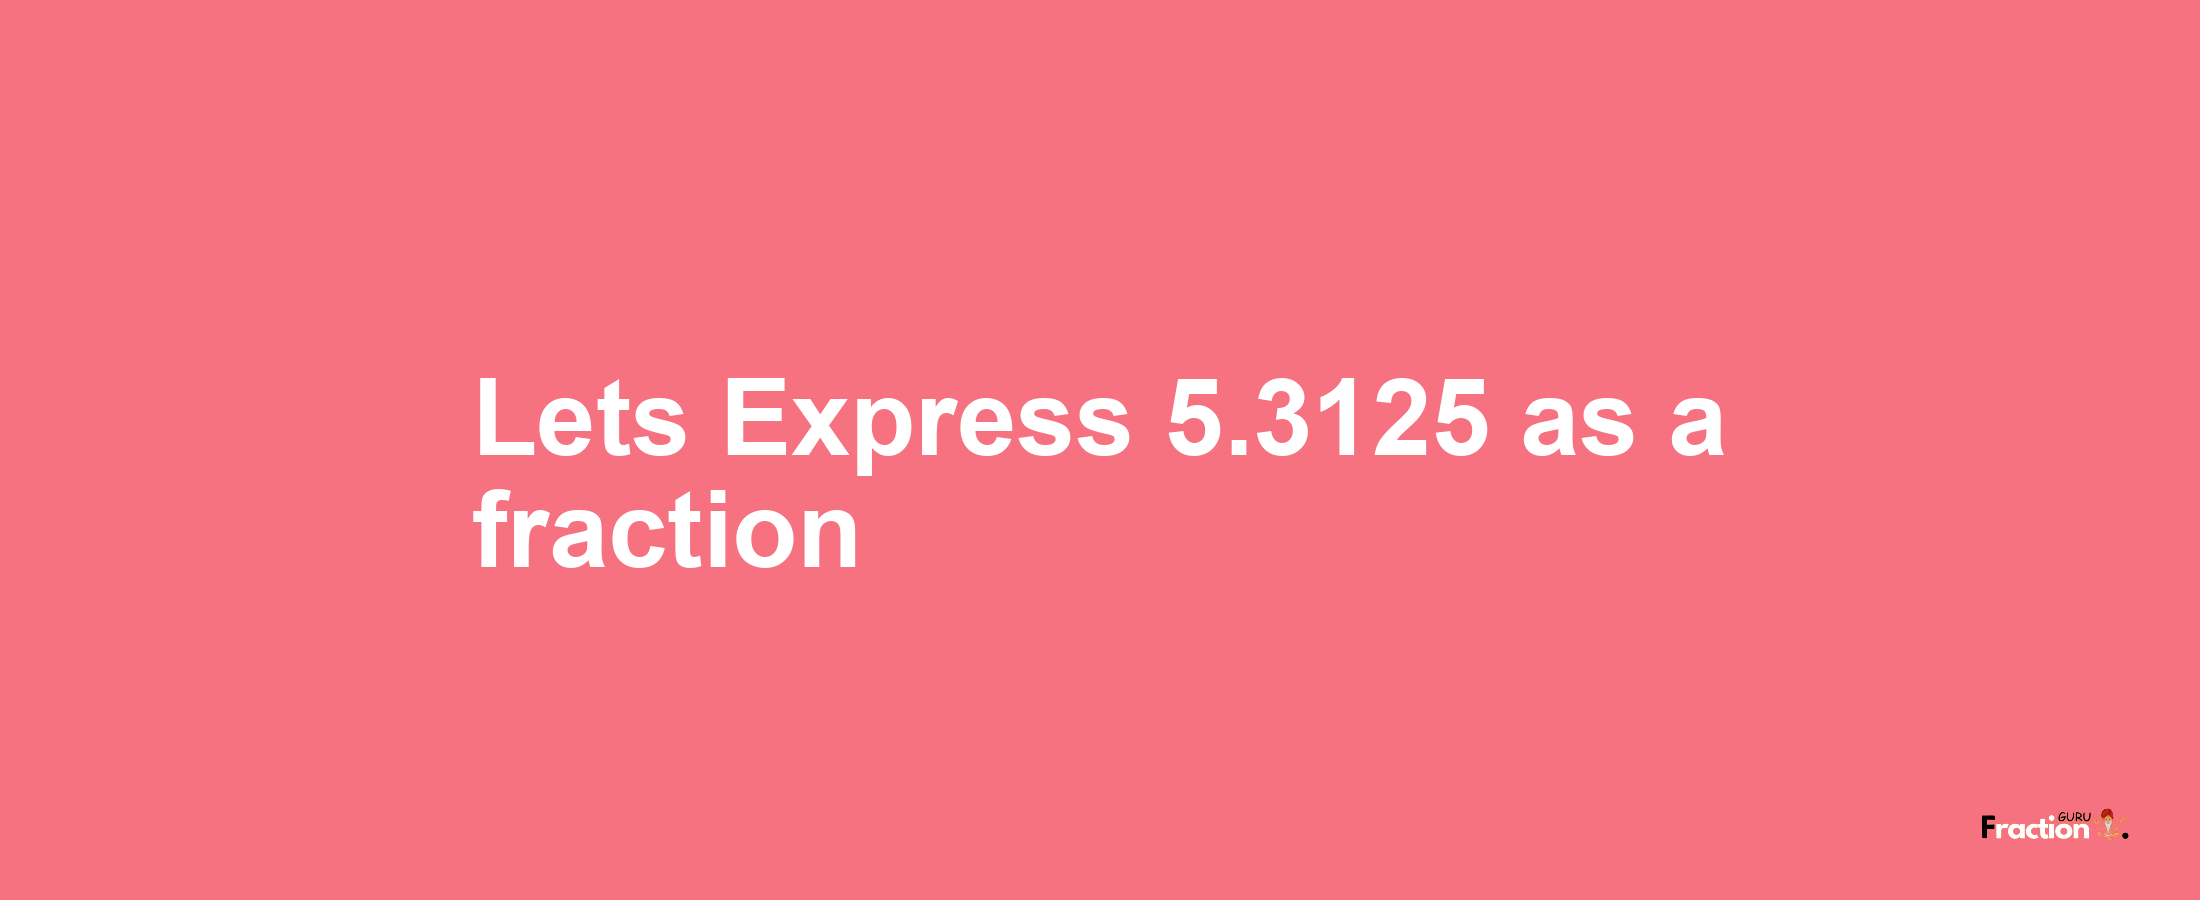 Lets Express 5.3125 as afraction